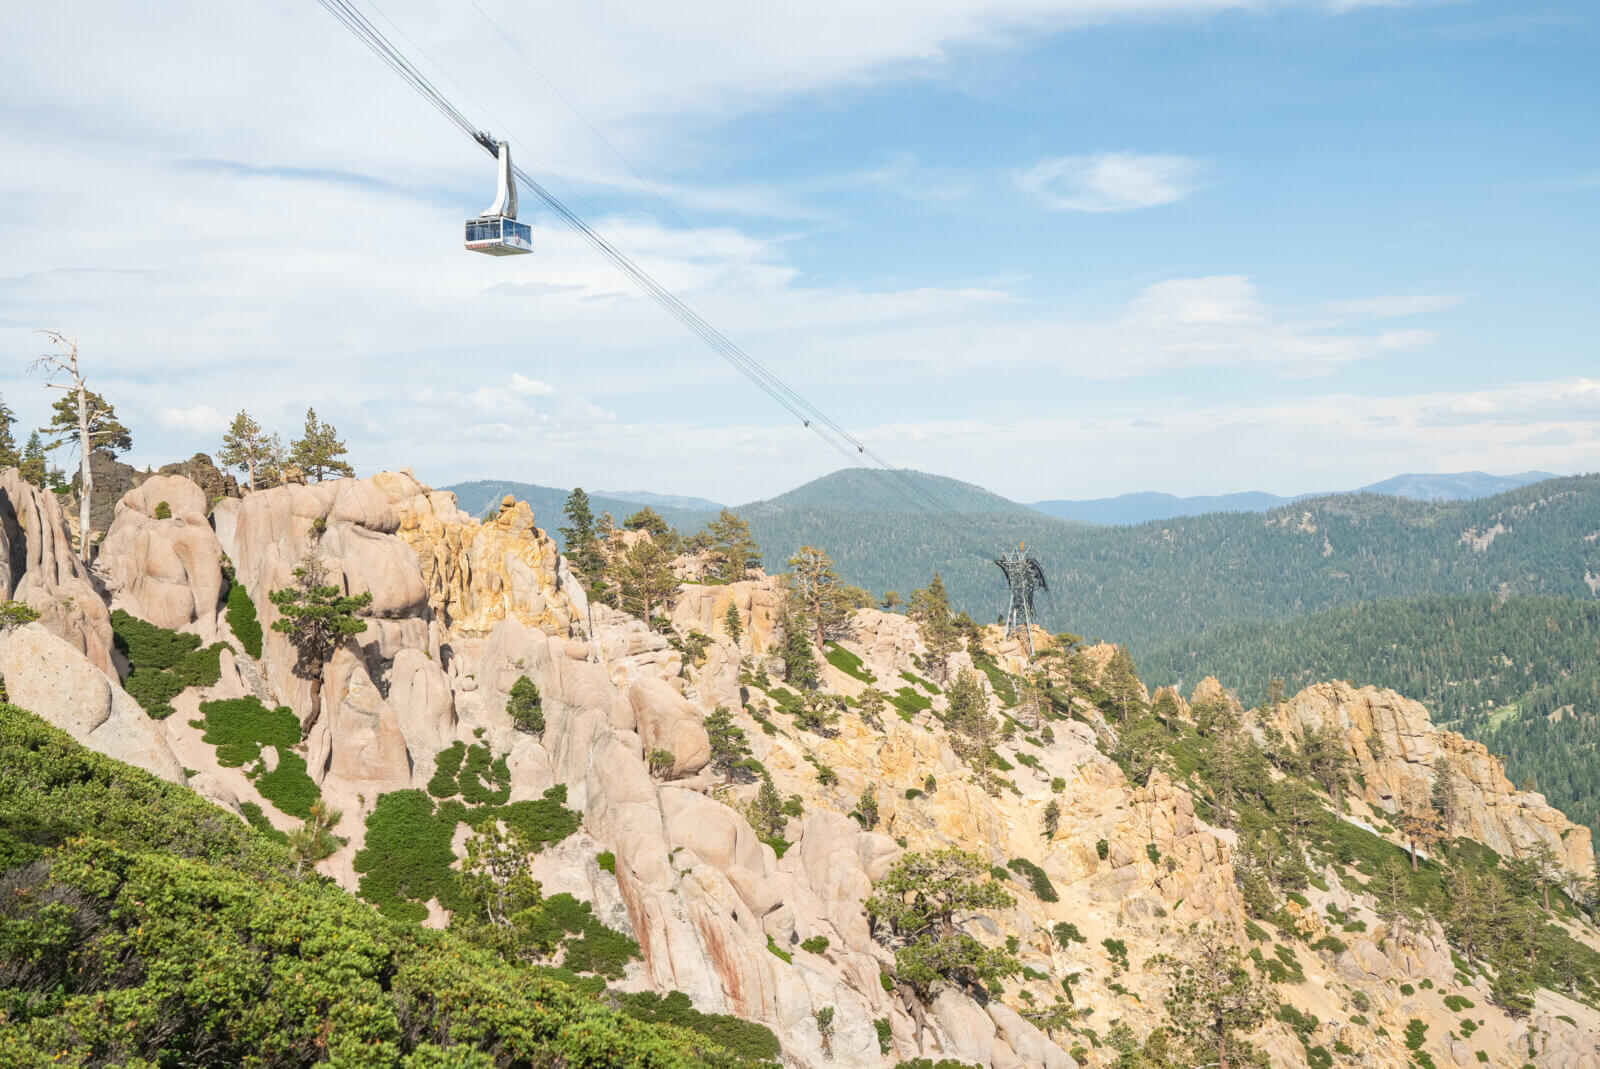 The Palisades Tahoe Tram ascending the cables above the Tahoe Via Ferrata. One of the best Lake Tahoe adventures!